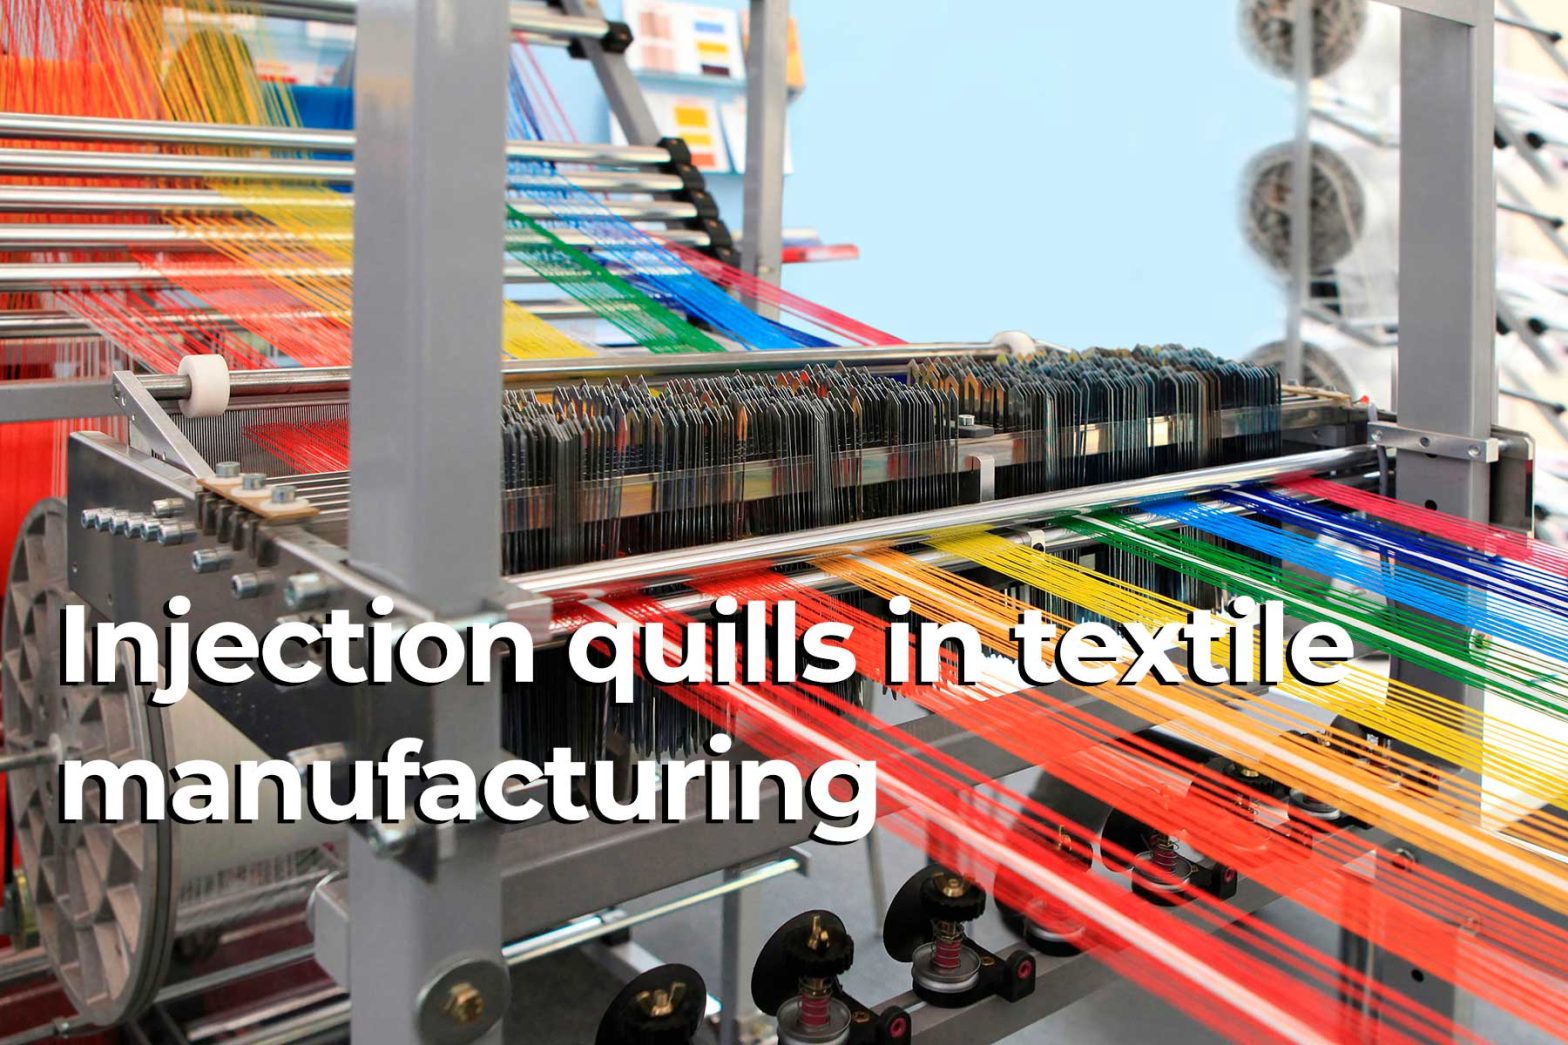 Benefits of using injection quills from India in textile manufacturing